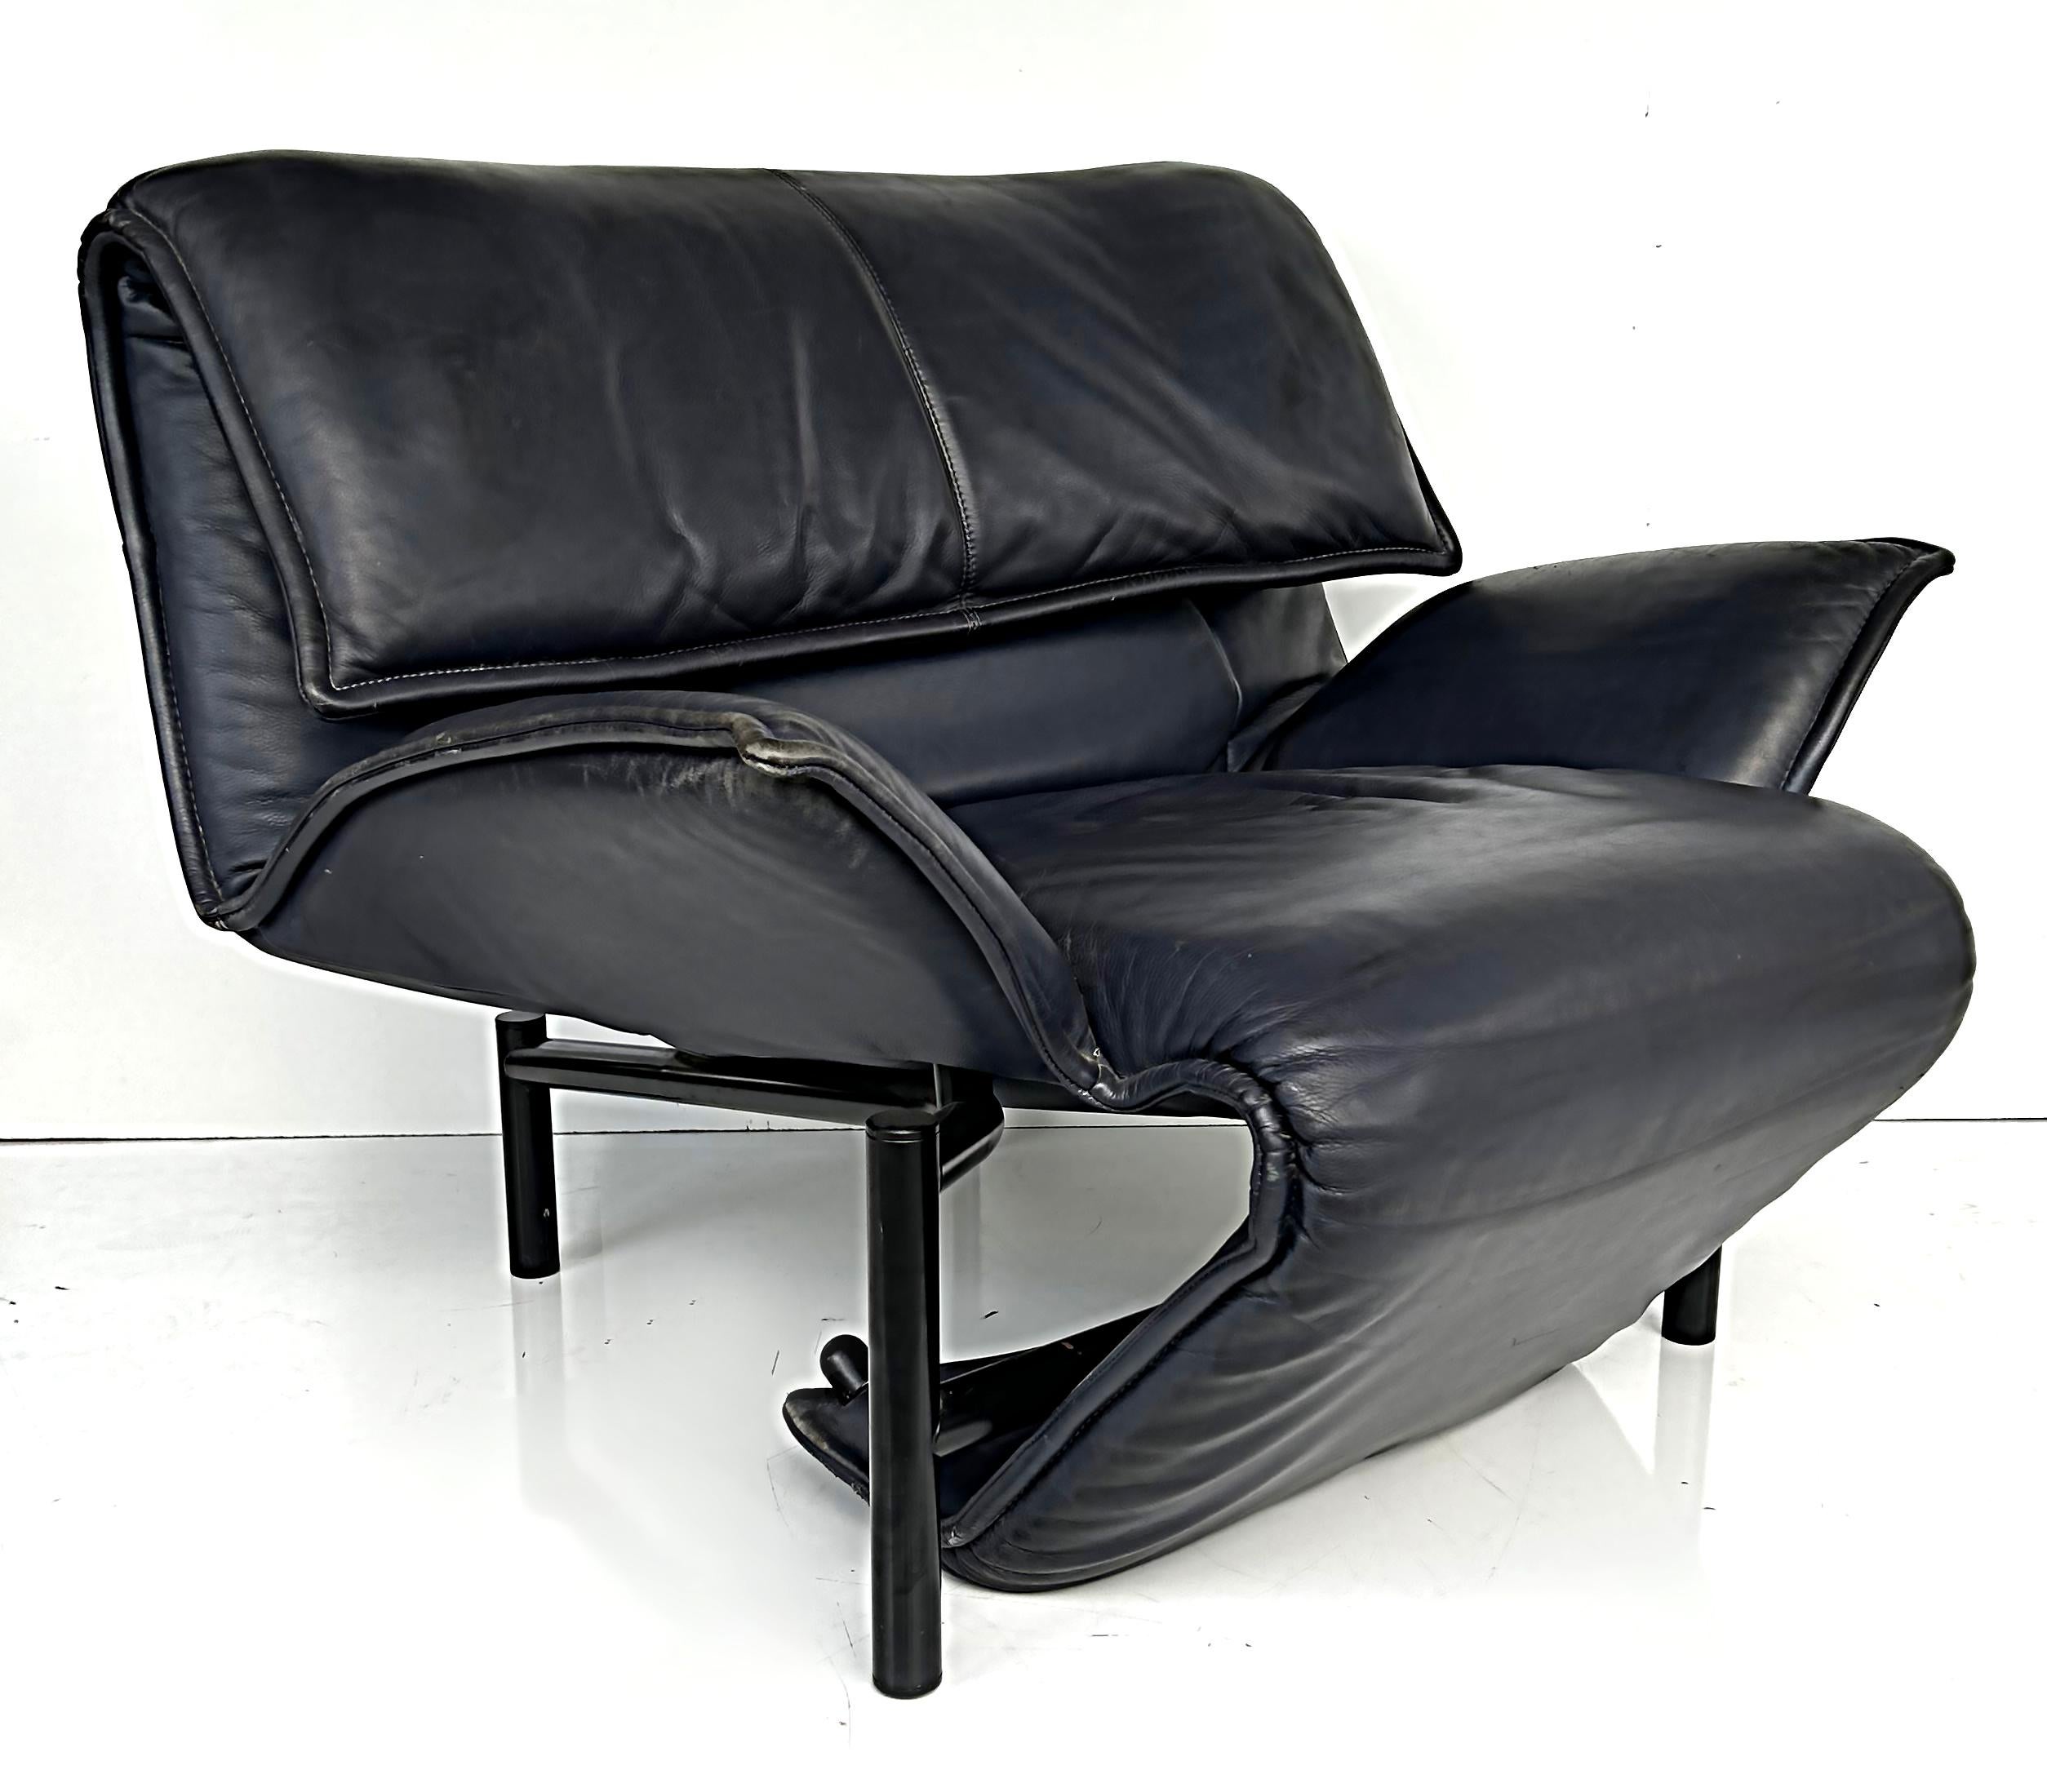 Italian Vico Magistretti Cassina Italy Leather Chaise Lounge Chairs, 